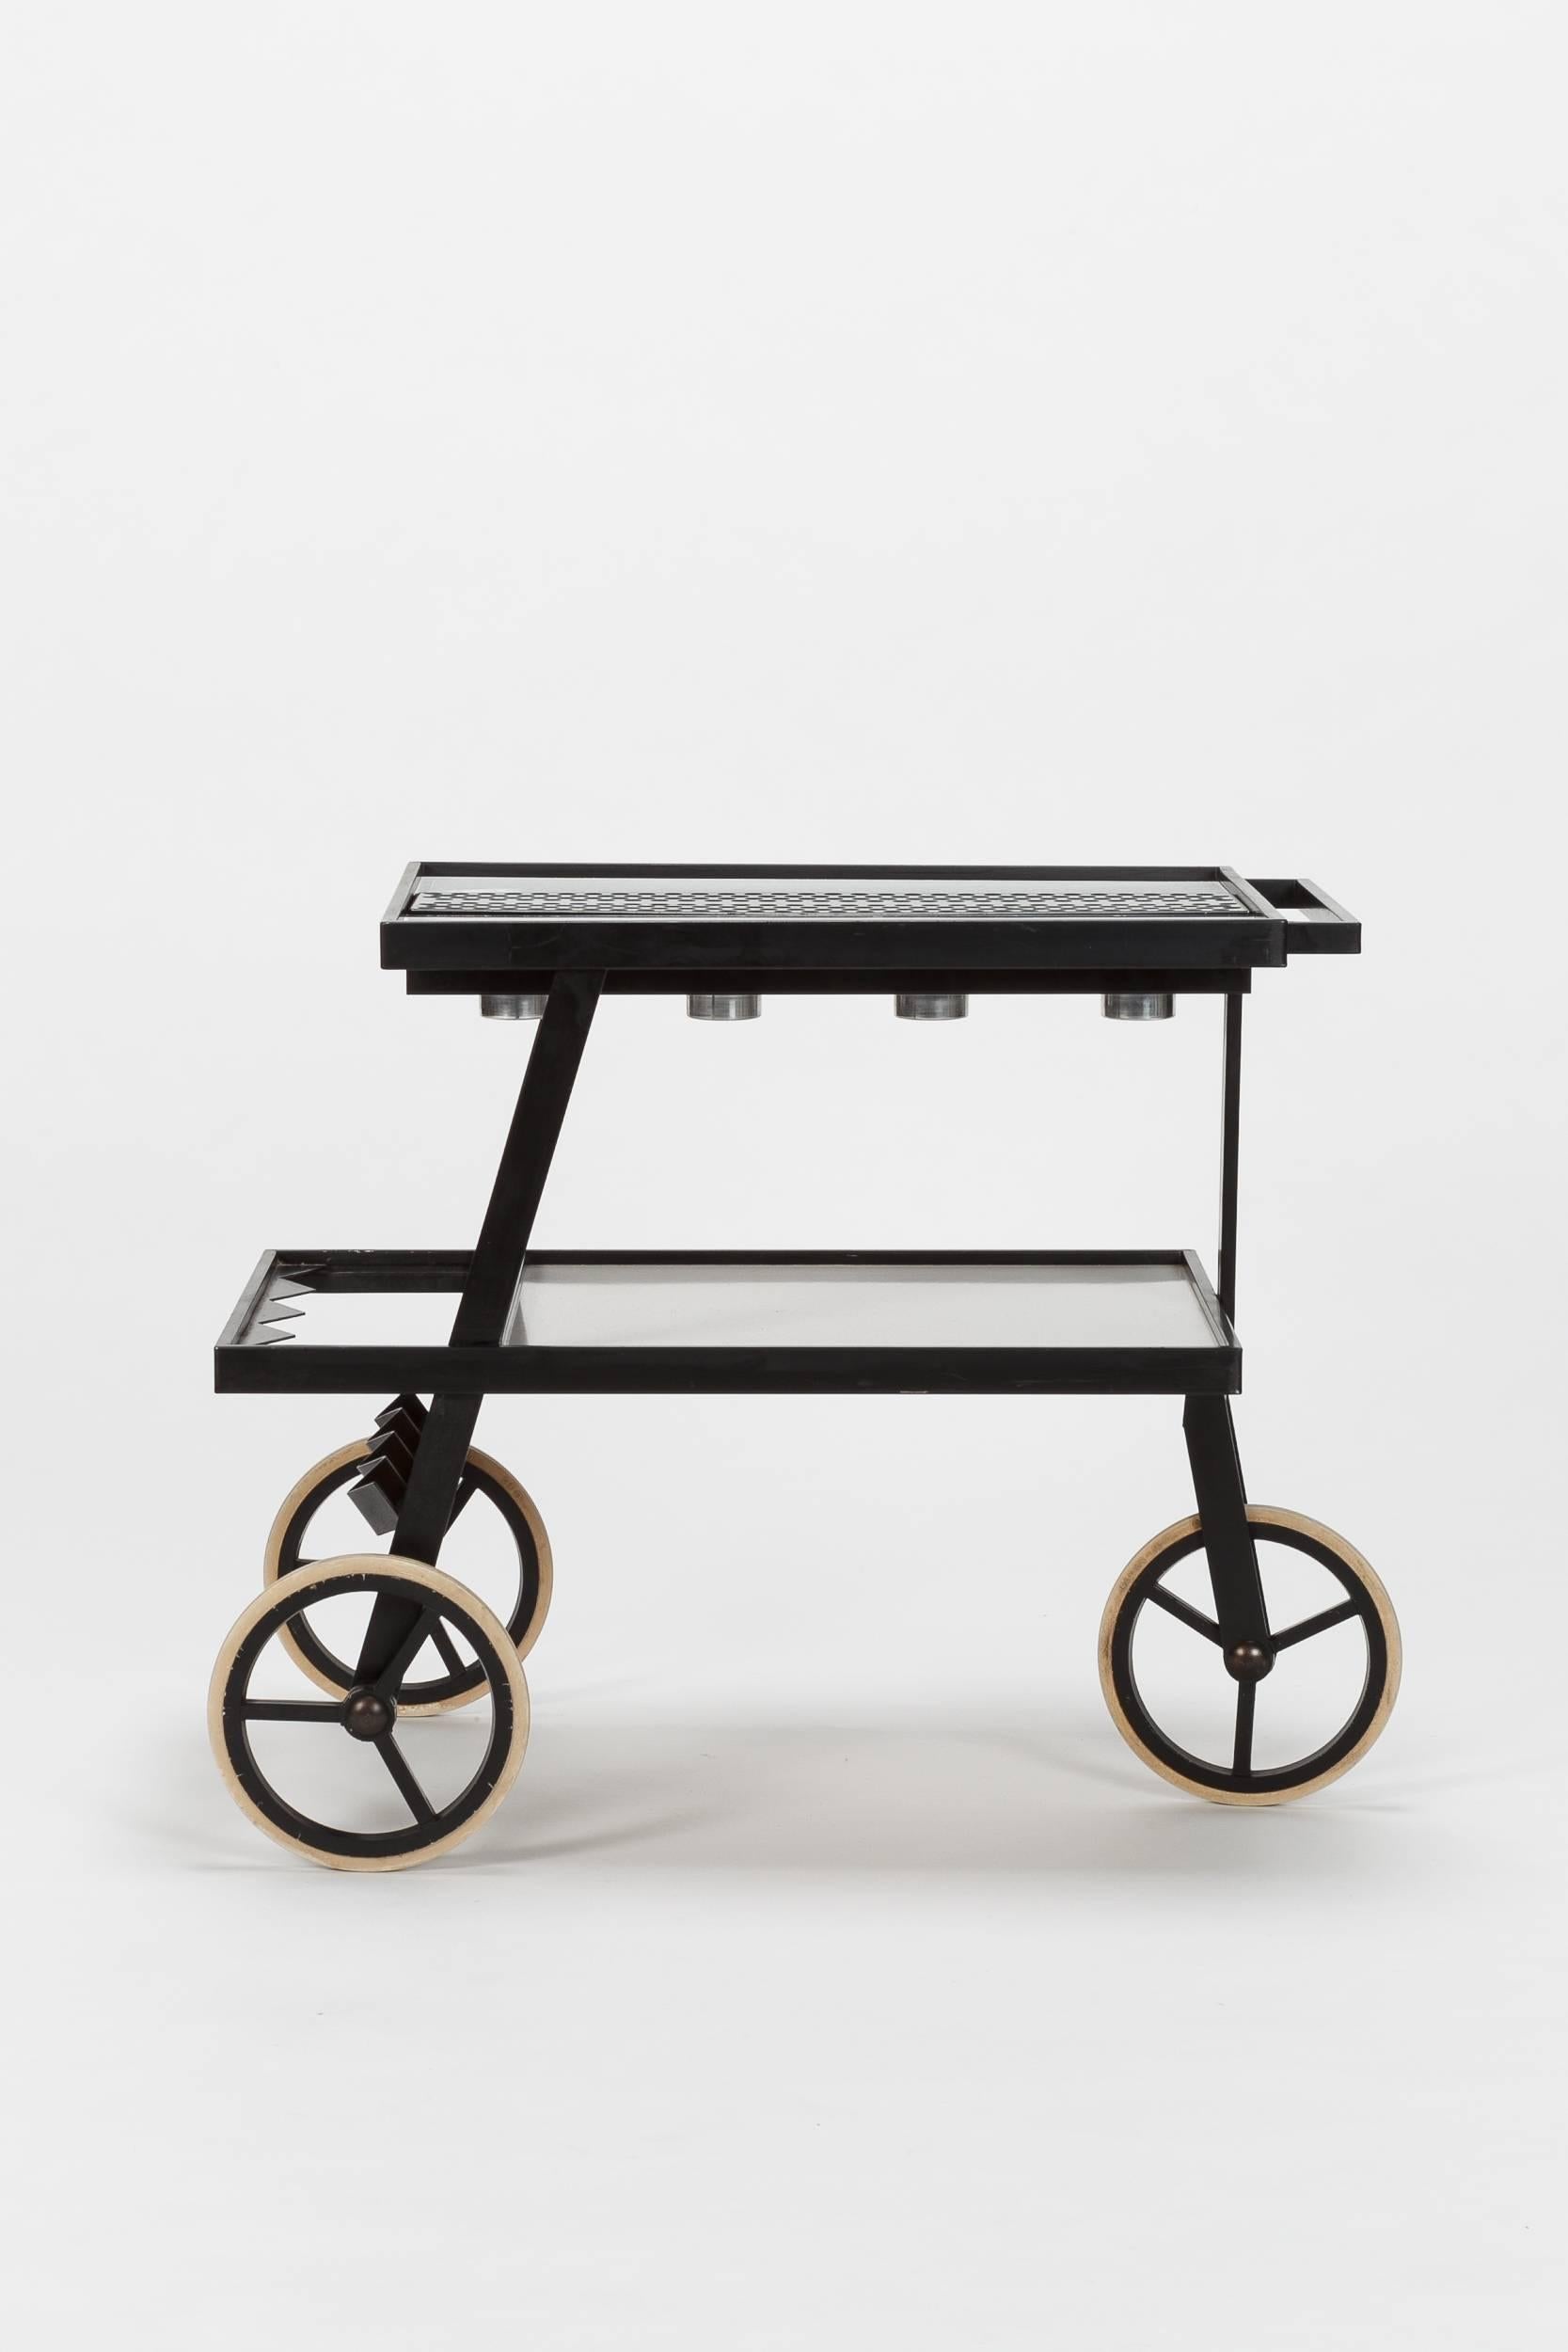 Dutch black and white barcart with rubber wheels, manufactured by Pastoe in the 1970s. The upper shelf is made of Formica inlay and has integrated candleholders made of aluminum and glass. Probably used as a rechaud to keep meals warm. The lower